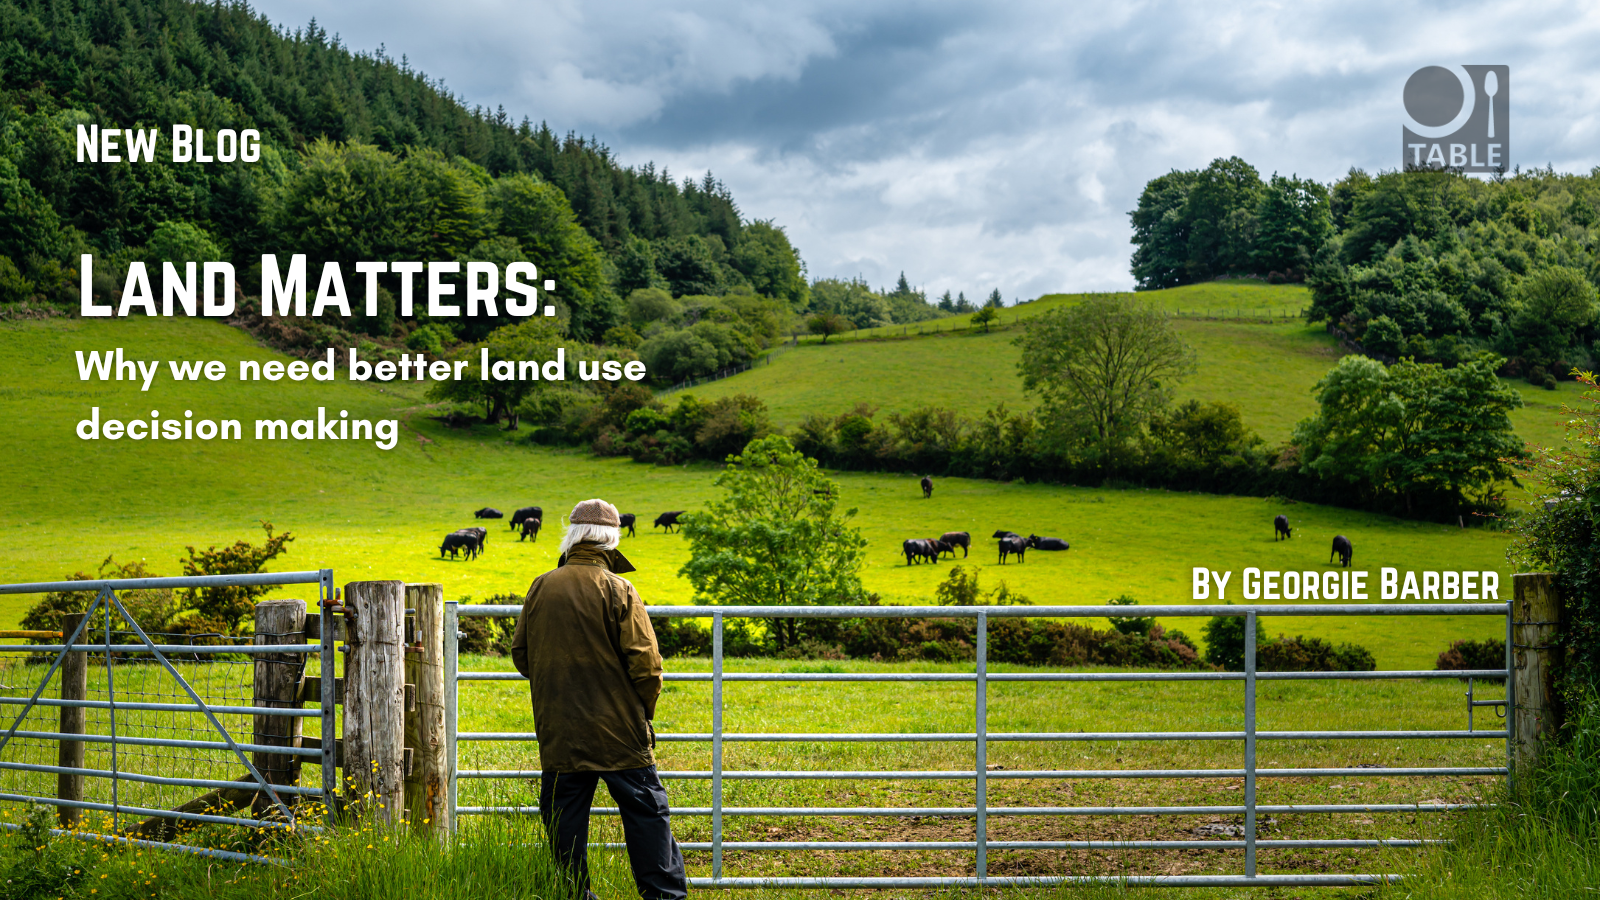 A flyer advertising a new blog called "Land Matters: why we need better land use decision making" by Georgie Barber. The background photo is a farmer standing next to a field of cows in Scotland by John F Scott.